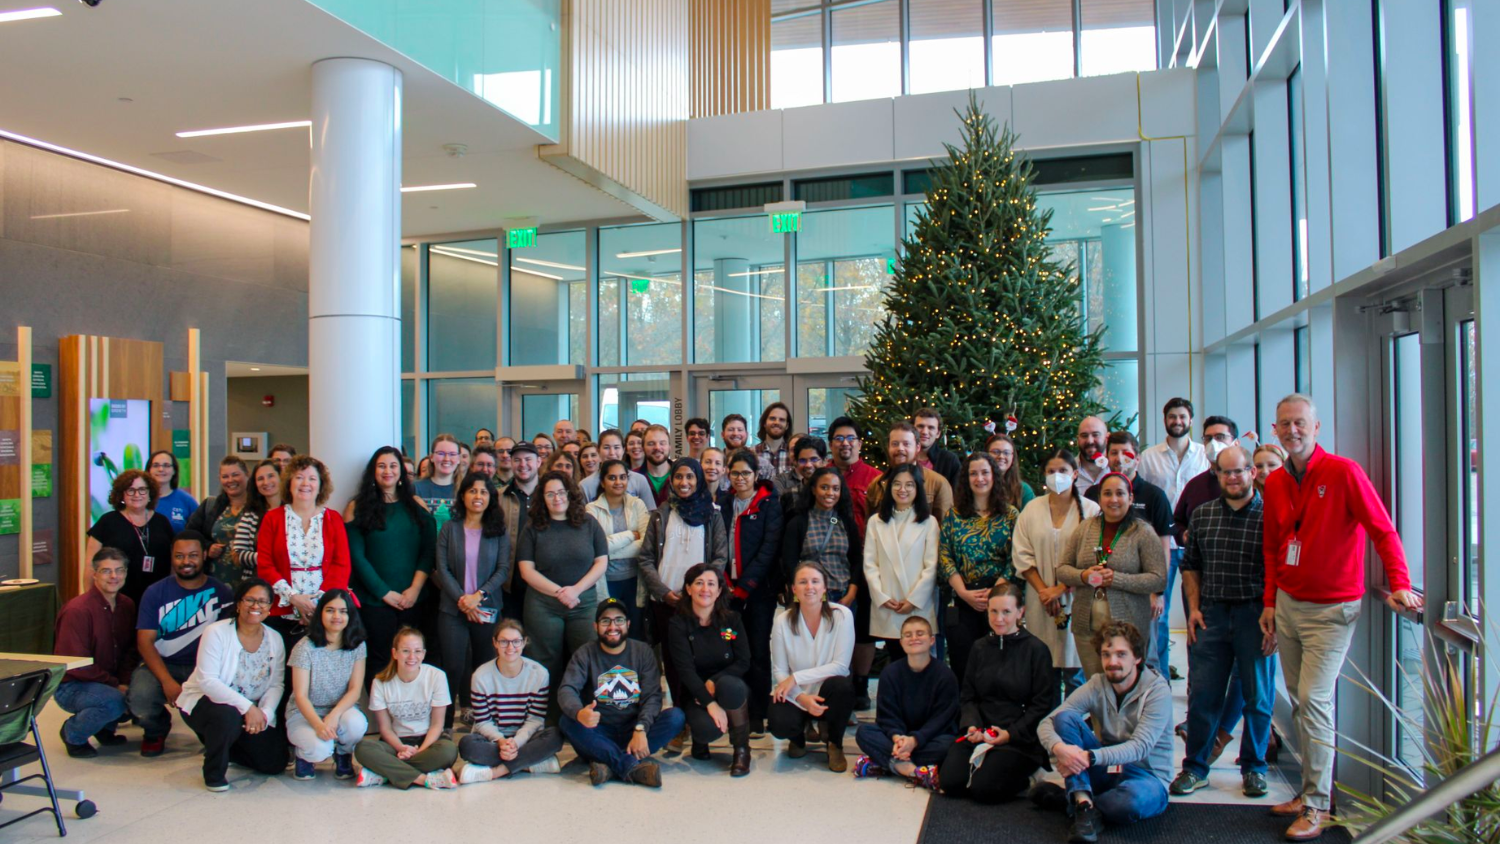 a group photo in front of the N.C. PSI holiday tree